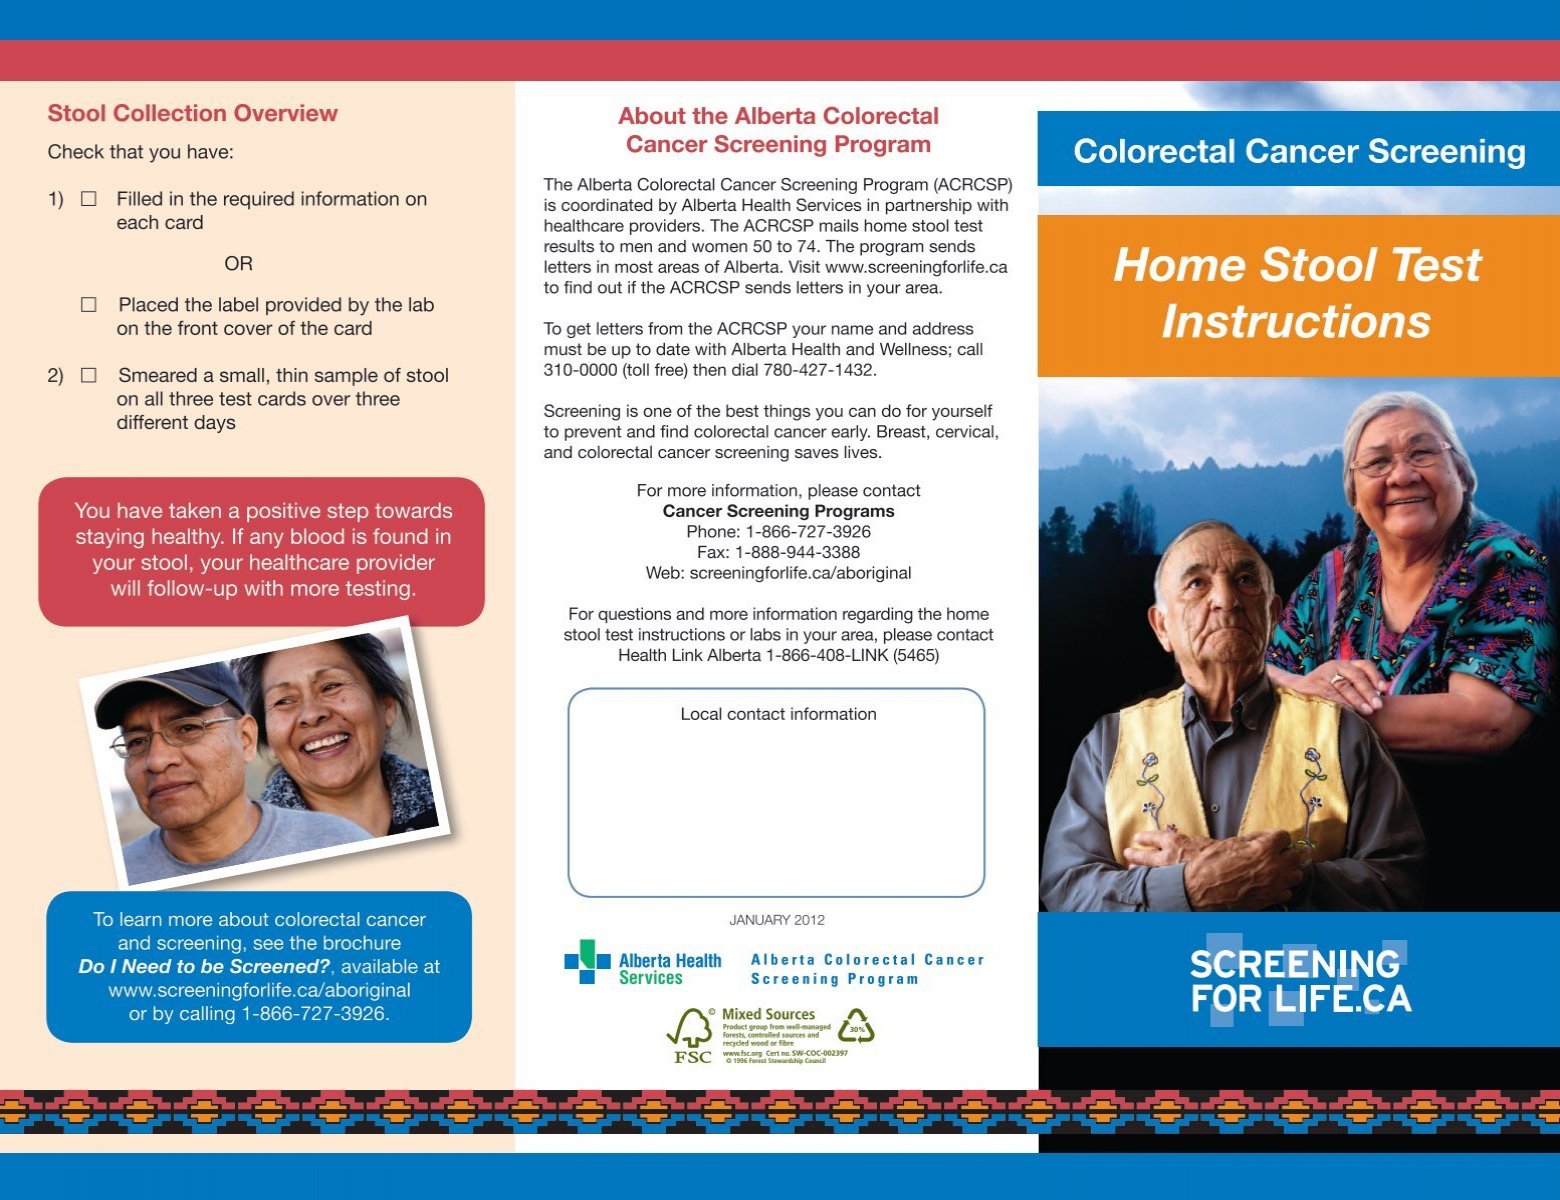 Brochure - Home Stool Test Instructions - Screening for Life